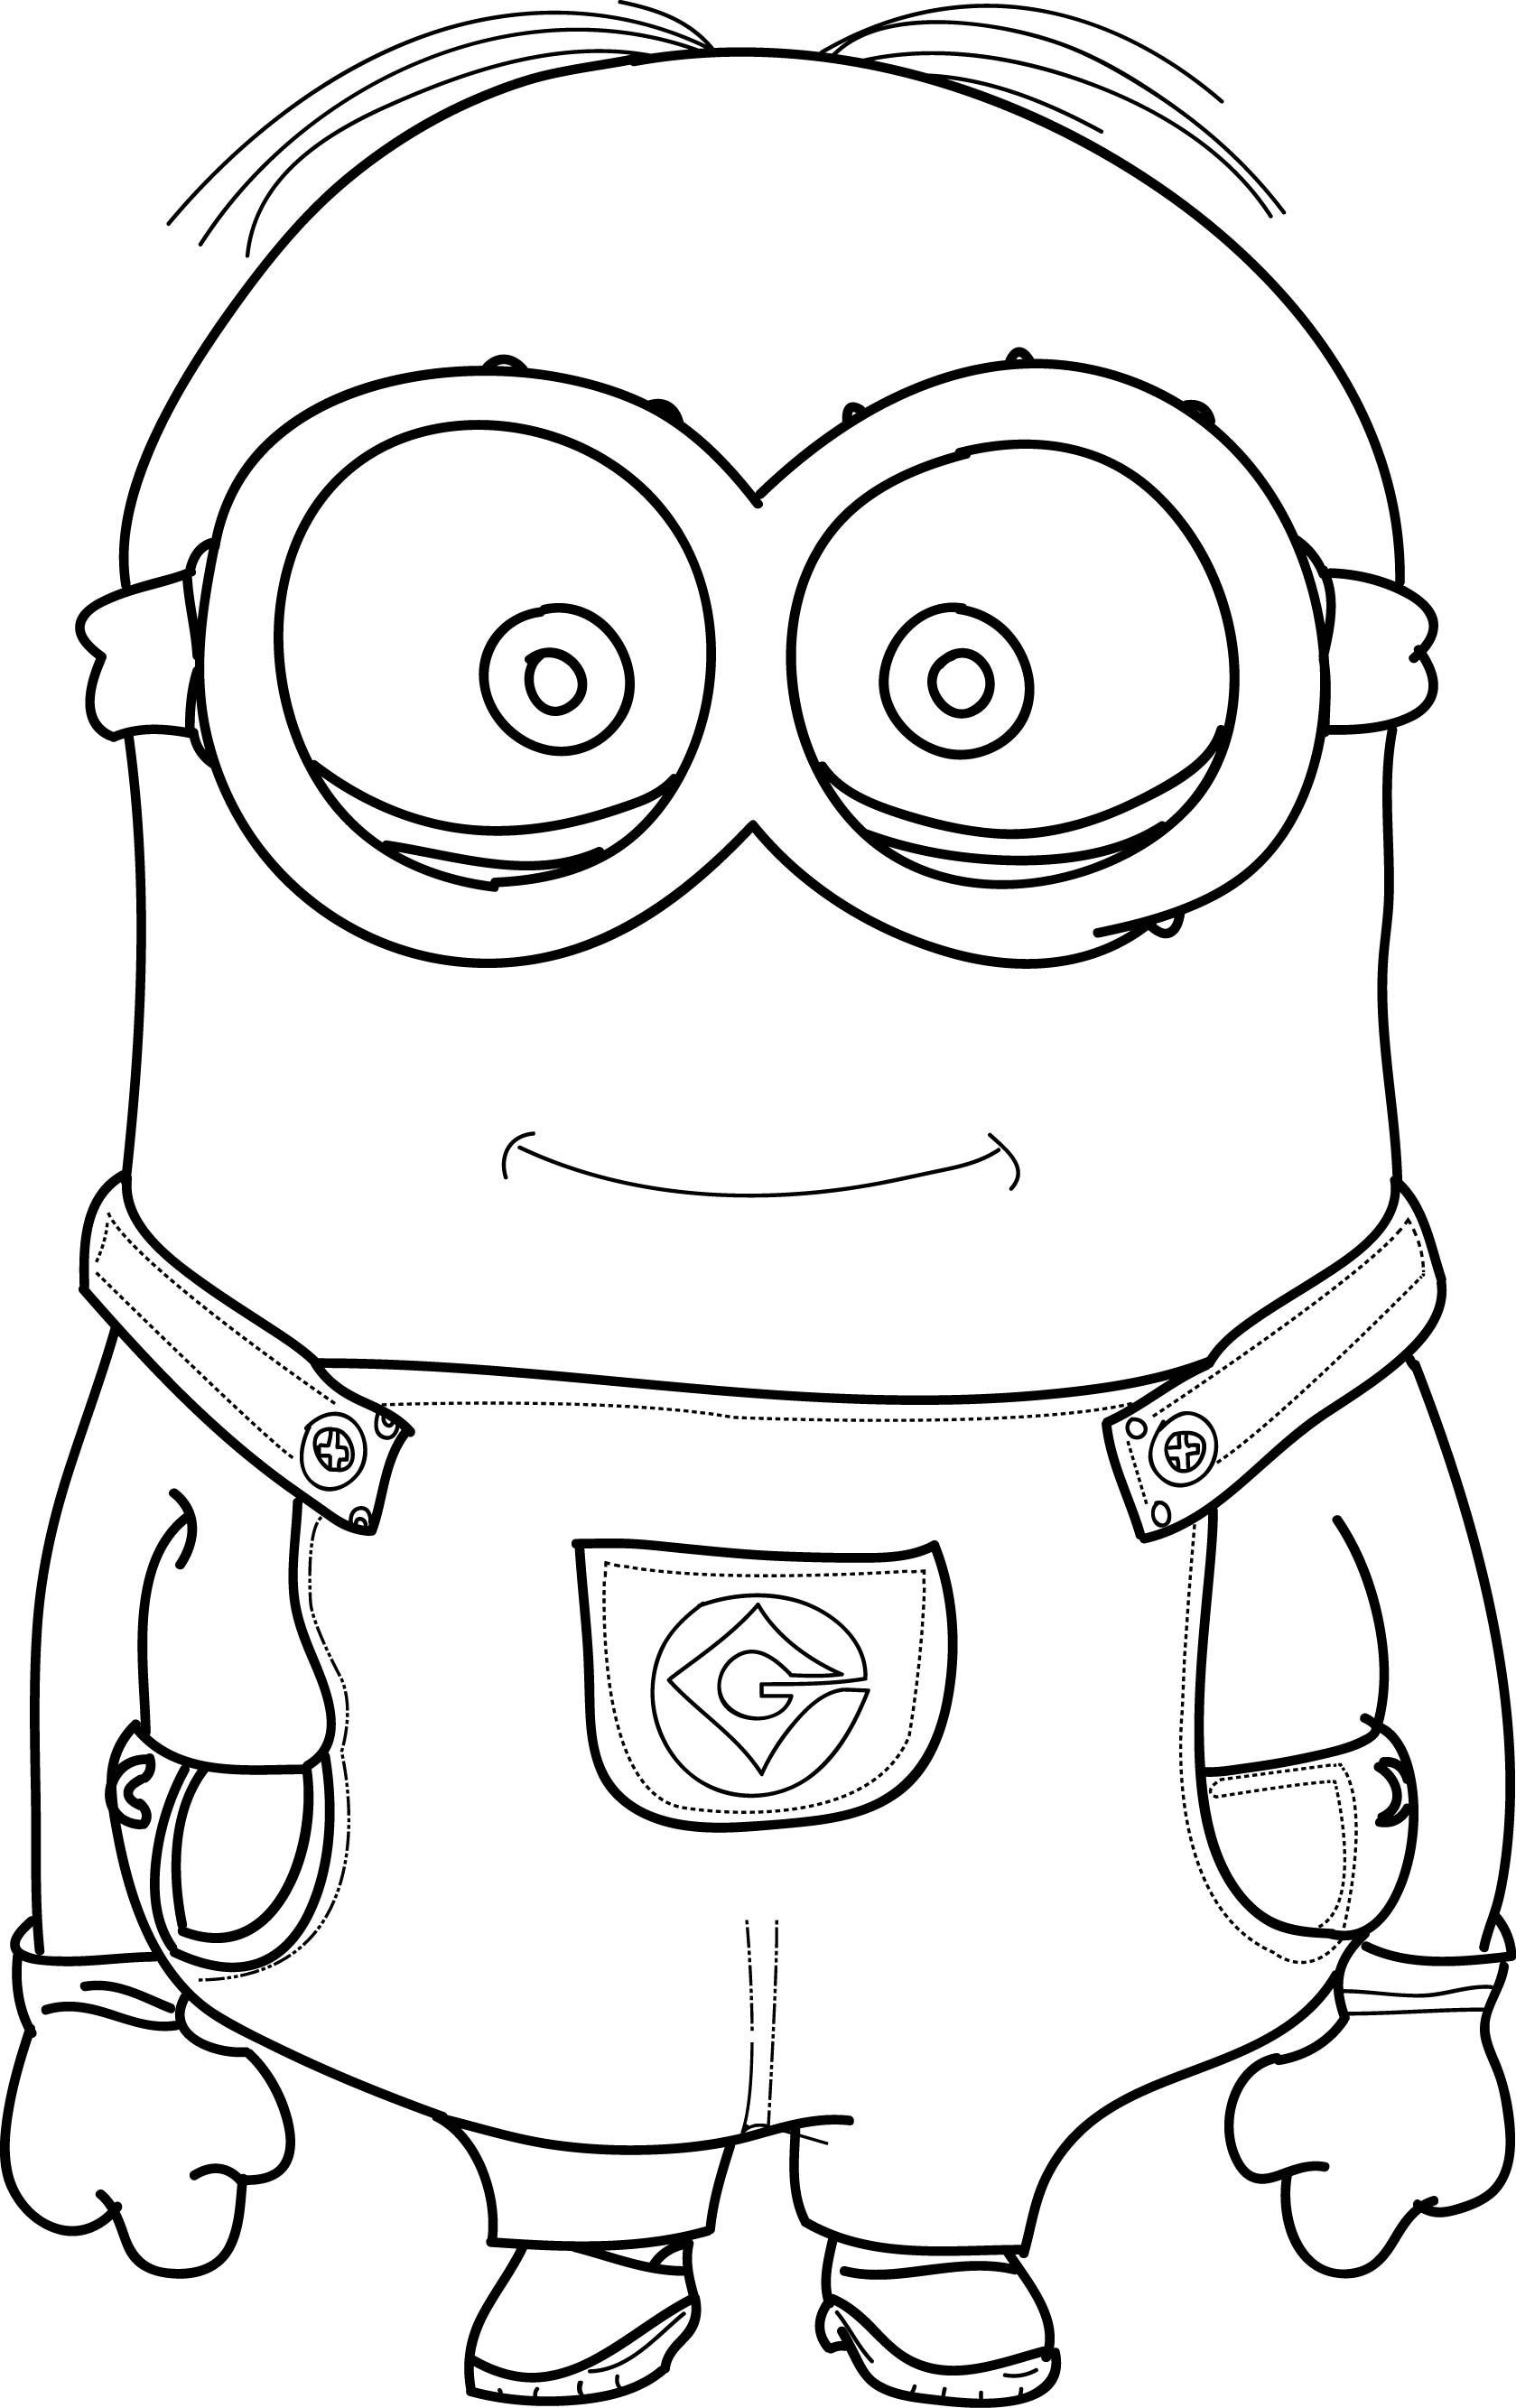 Cool Coloring Sheet For Boys
 Minions Coloring Pages wecoloringpage